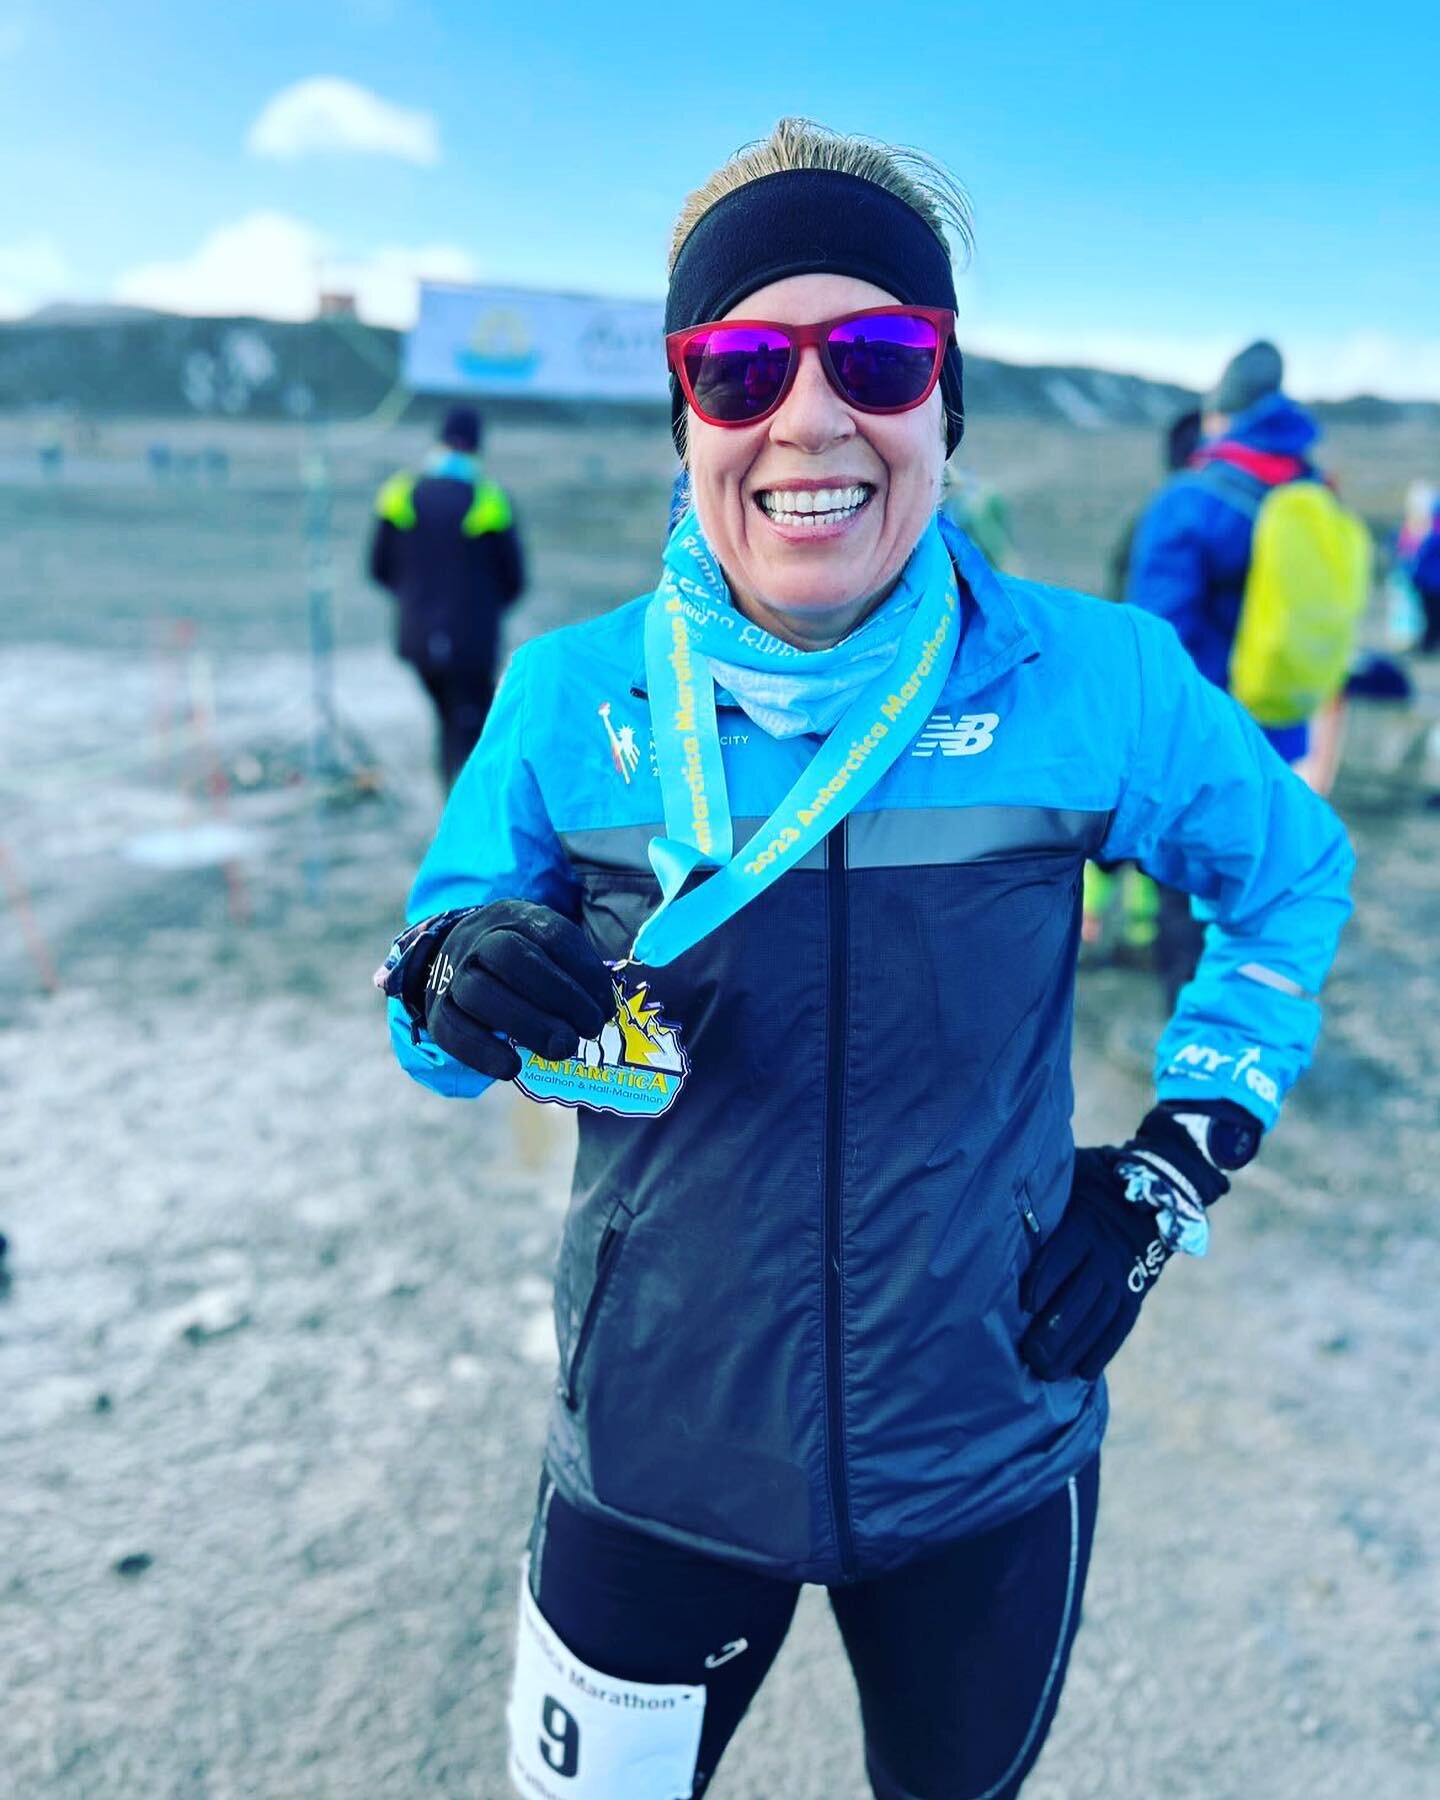 When you&rsquo;ve run over 50 marathons you start going a bit &ldquo;out of the box&rdquo; on your race itinerary🏃🏼&zwj;♀️❄️ @bbaur1011 

Huge congrats to Hustlers Bobbi and Megan who completed the Antarctica marathon amidst strong wins, lots of cl